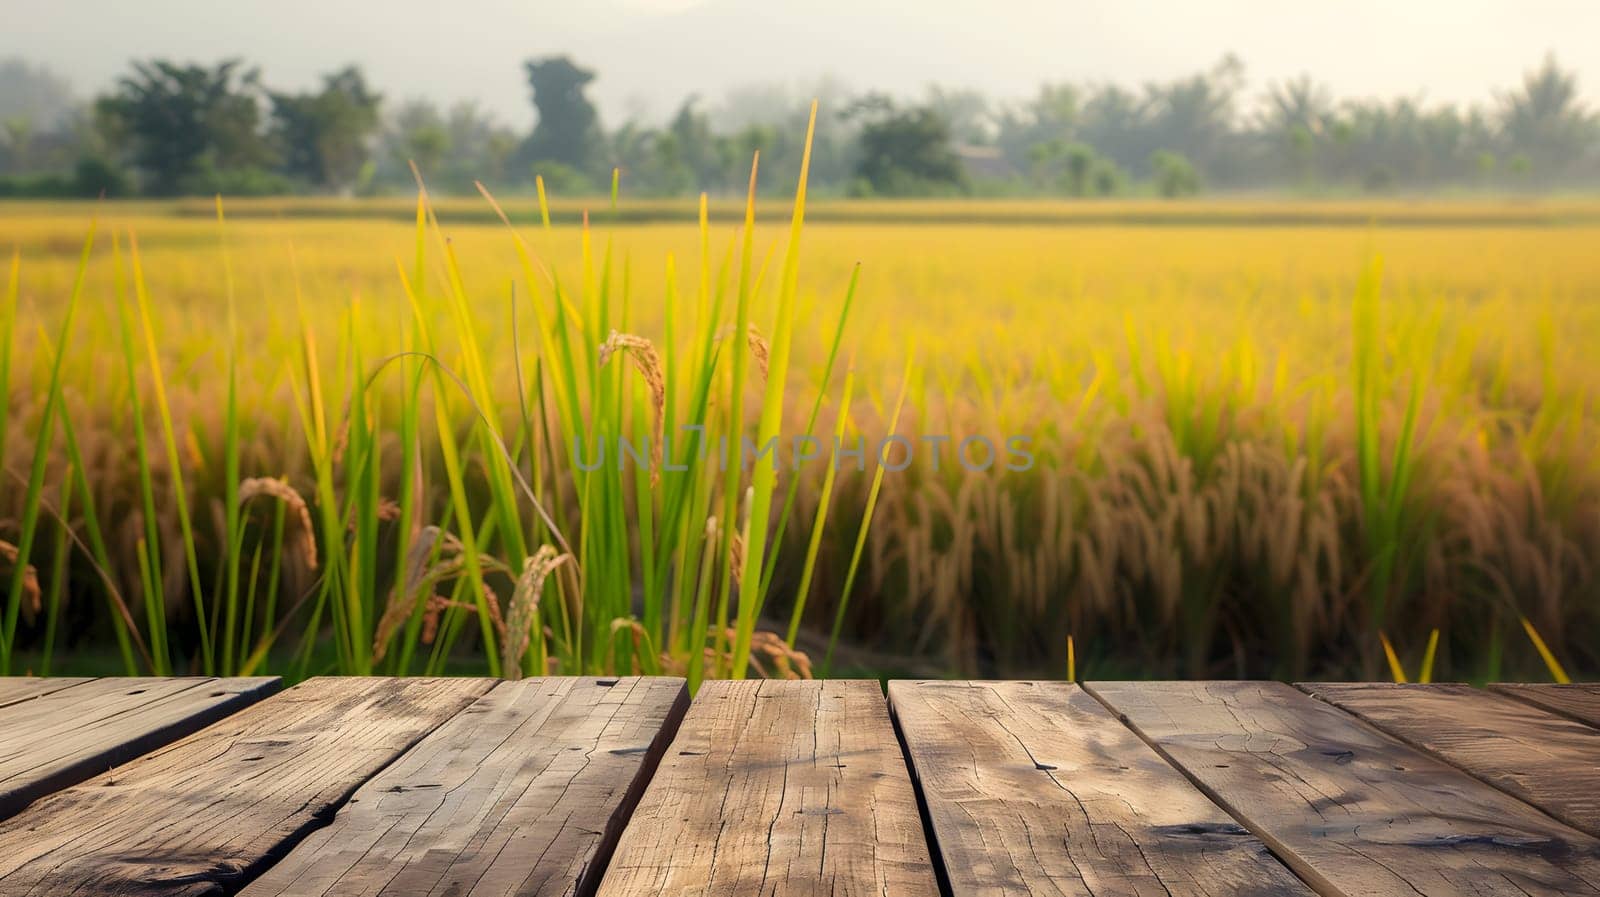 Wooden deck foreground, rice field background in rural area by Nadtochiy